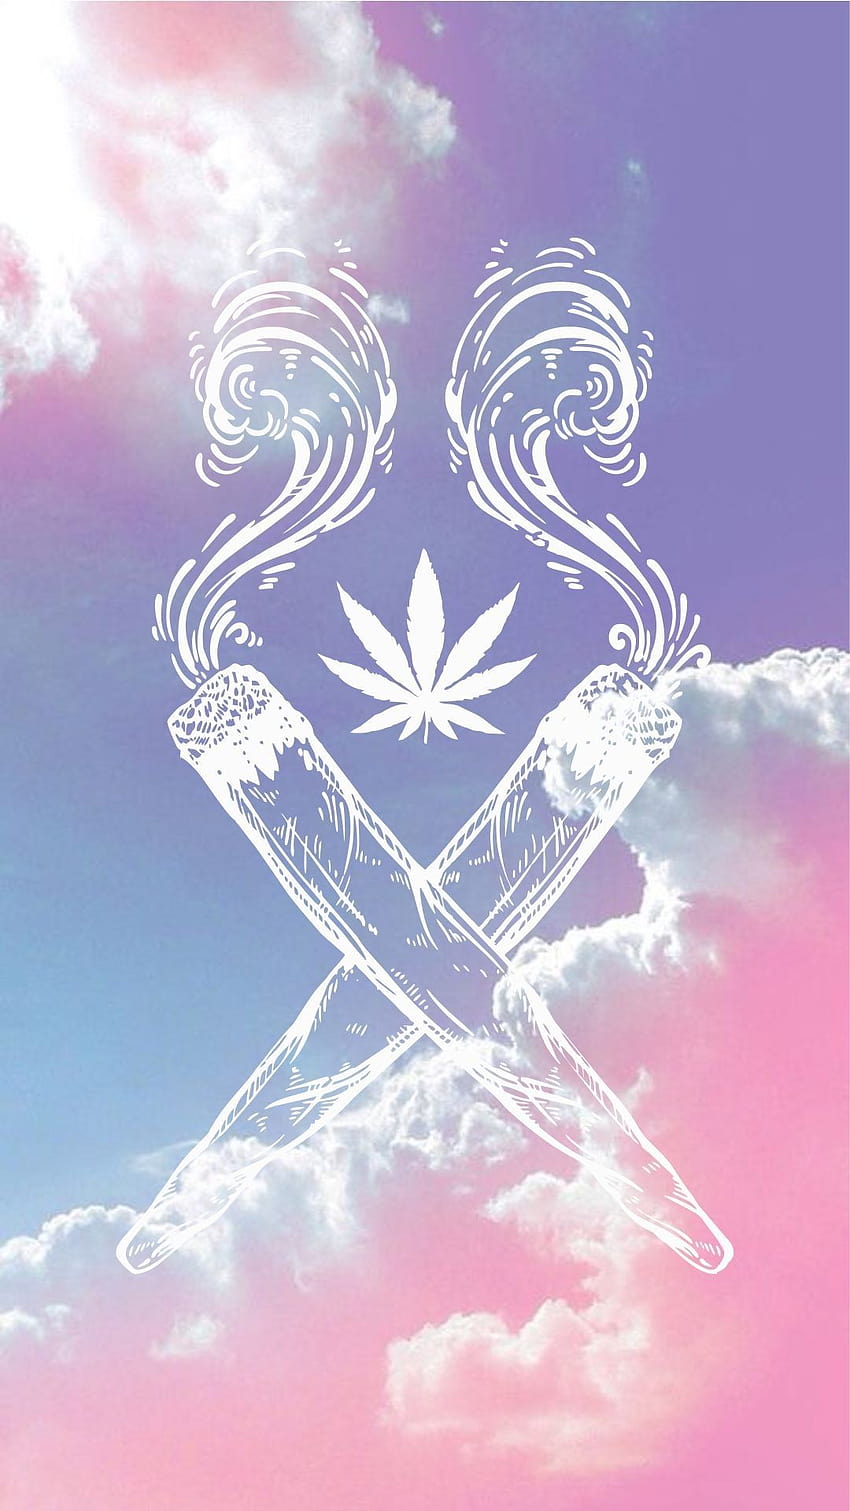 Trippy Weed, aesthetic cannabis HD phone wallpaper